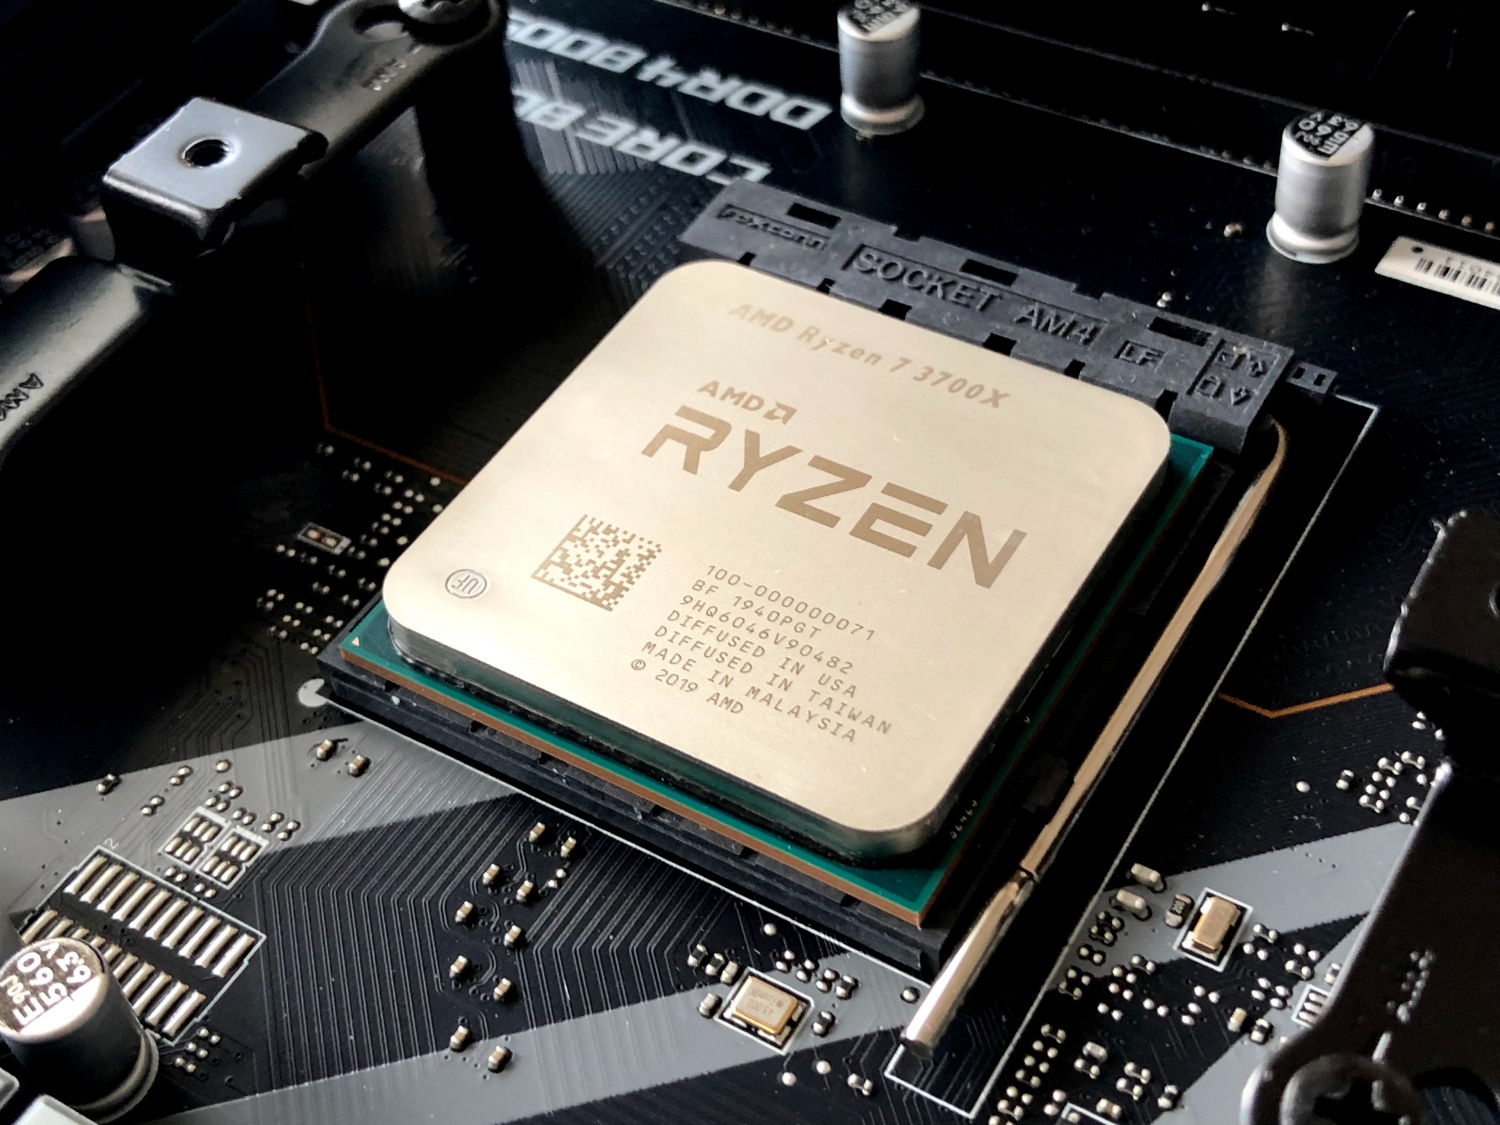 Top 6 Games You Can Play on AMD Ryzen Processor Laptops 